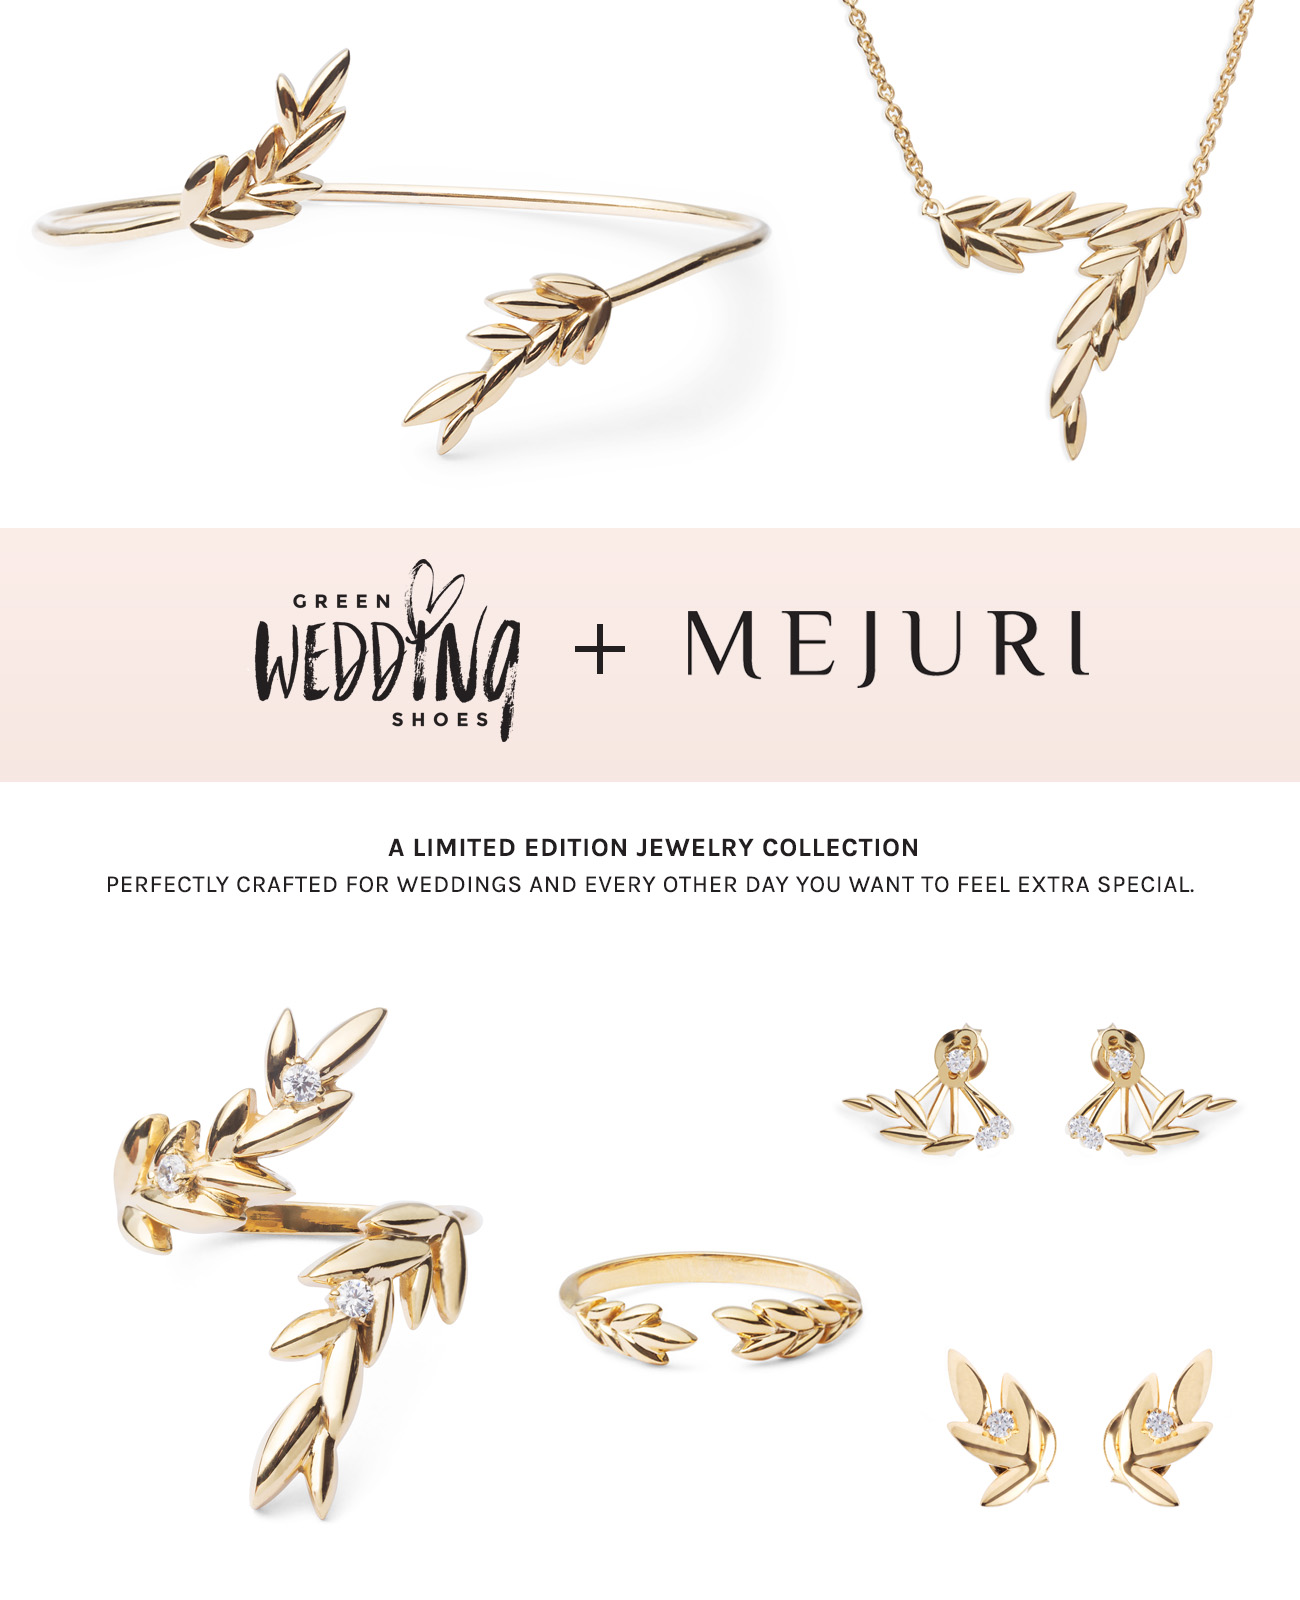 Green Wedding Shoes Jewelry collection with Mejuri